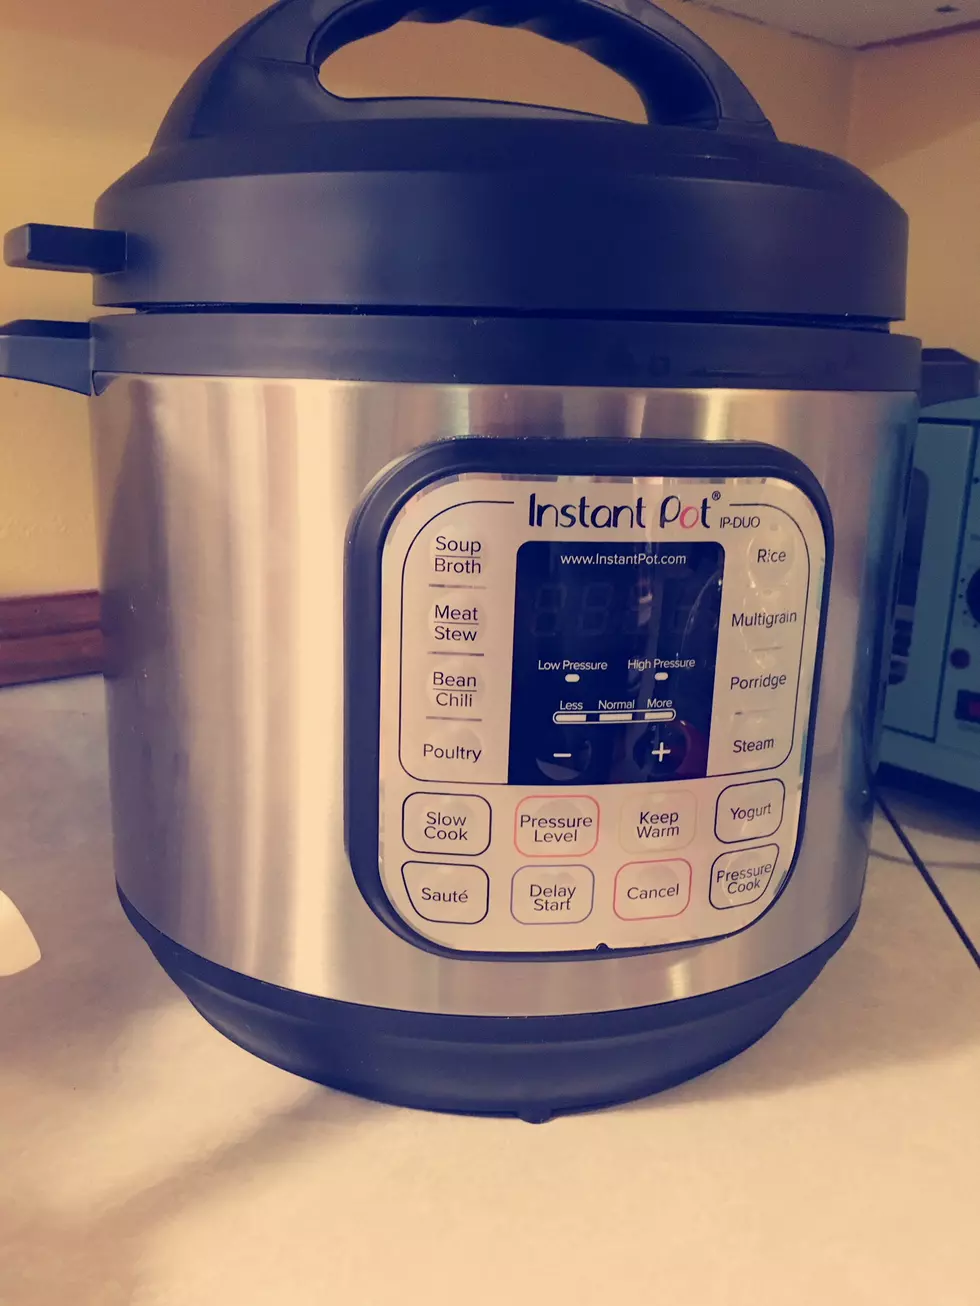 Get an Instant Pot, You’ll Thank Me Later